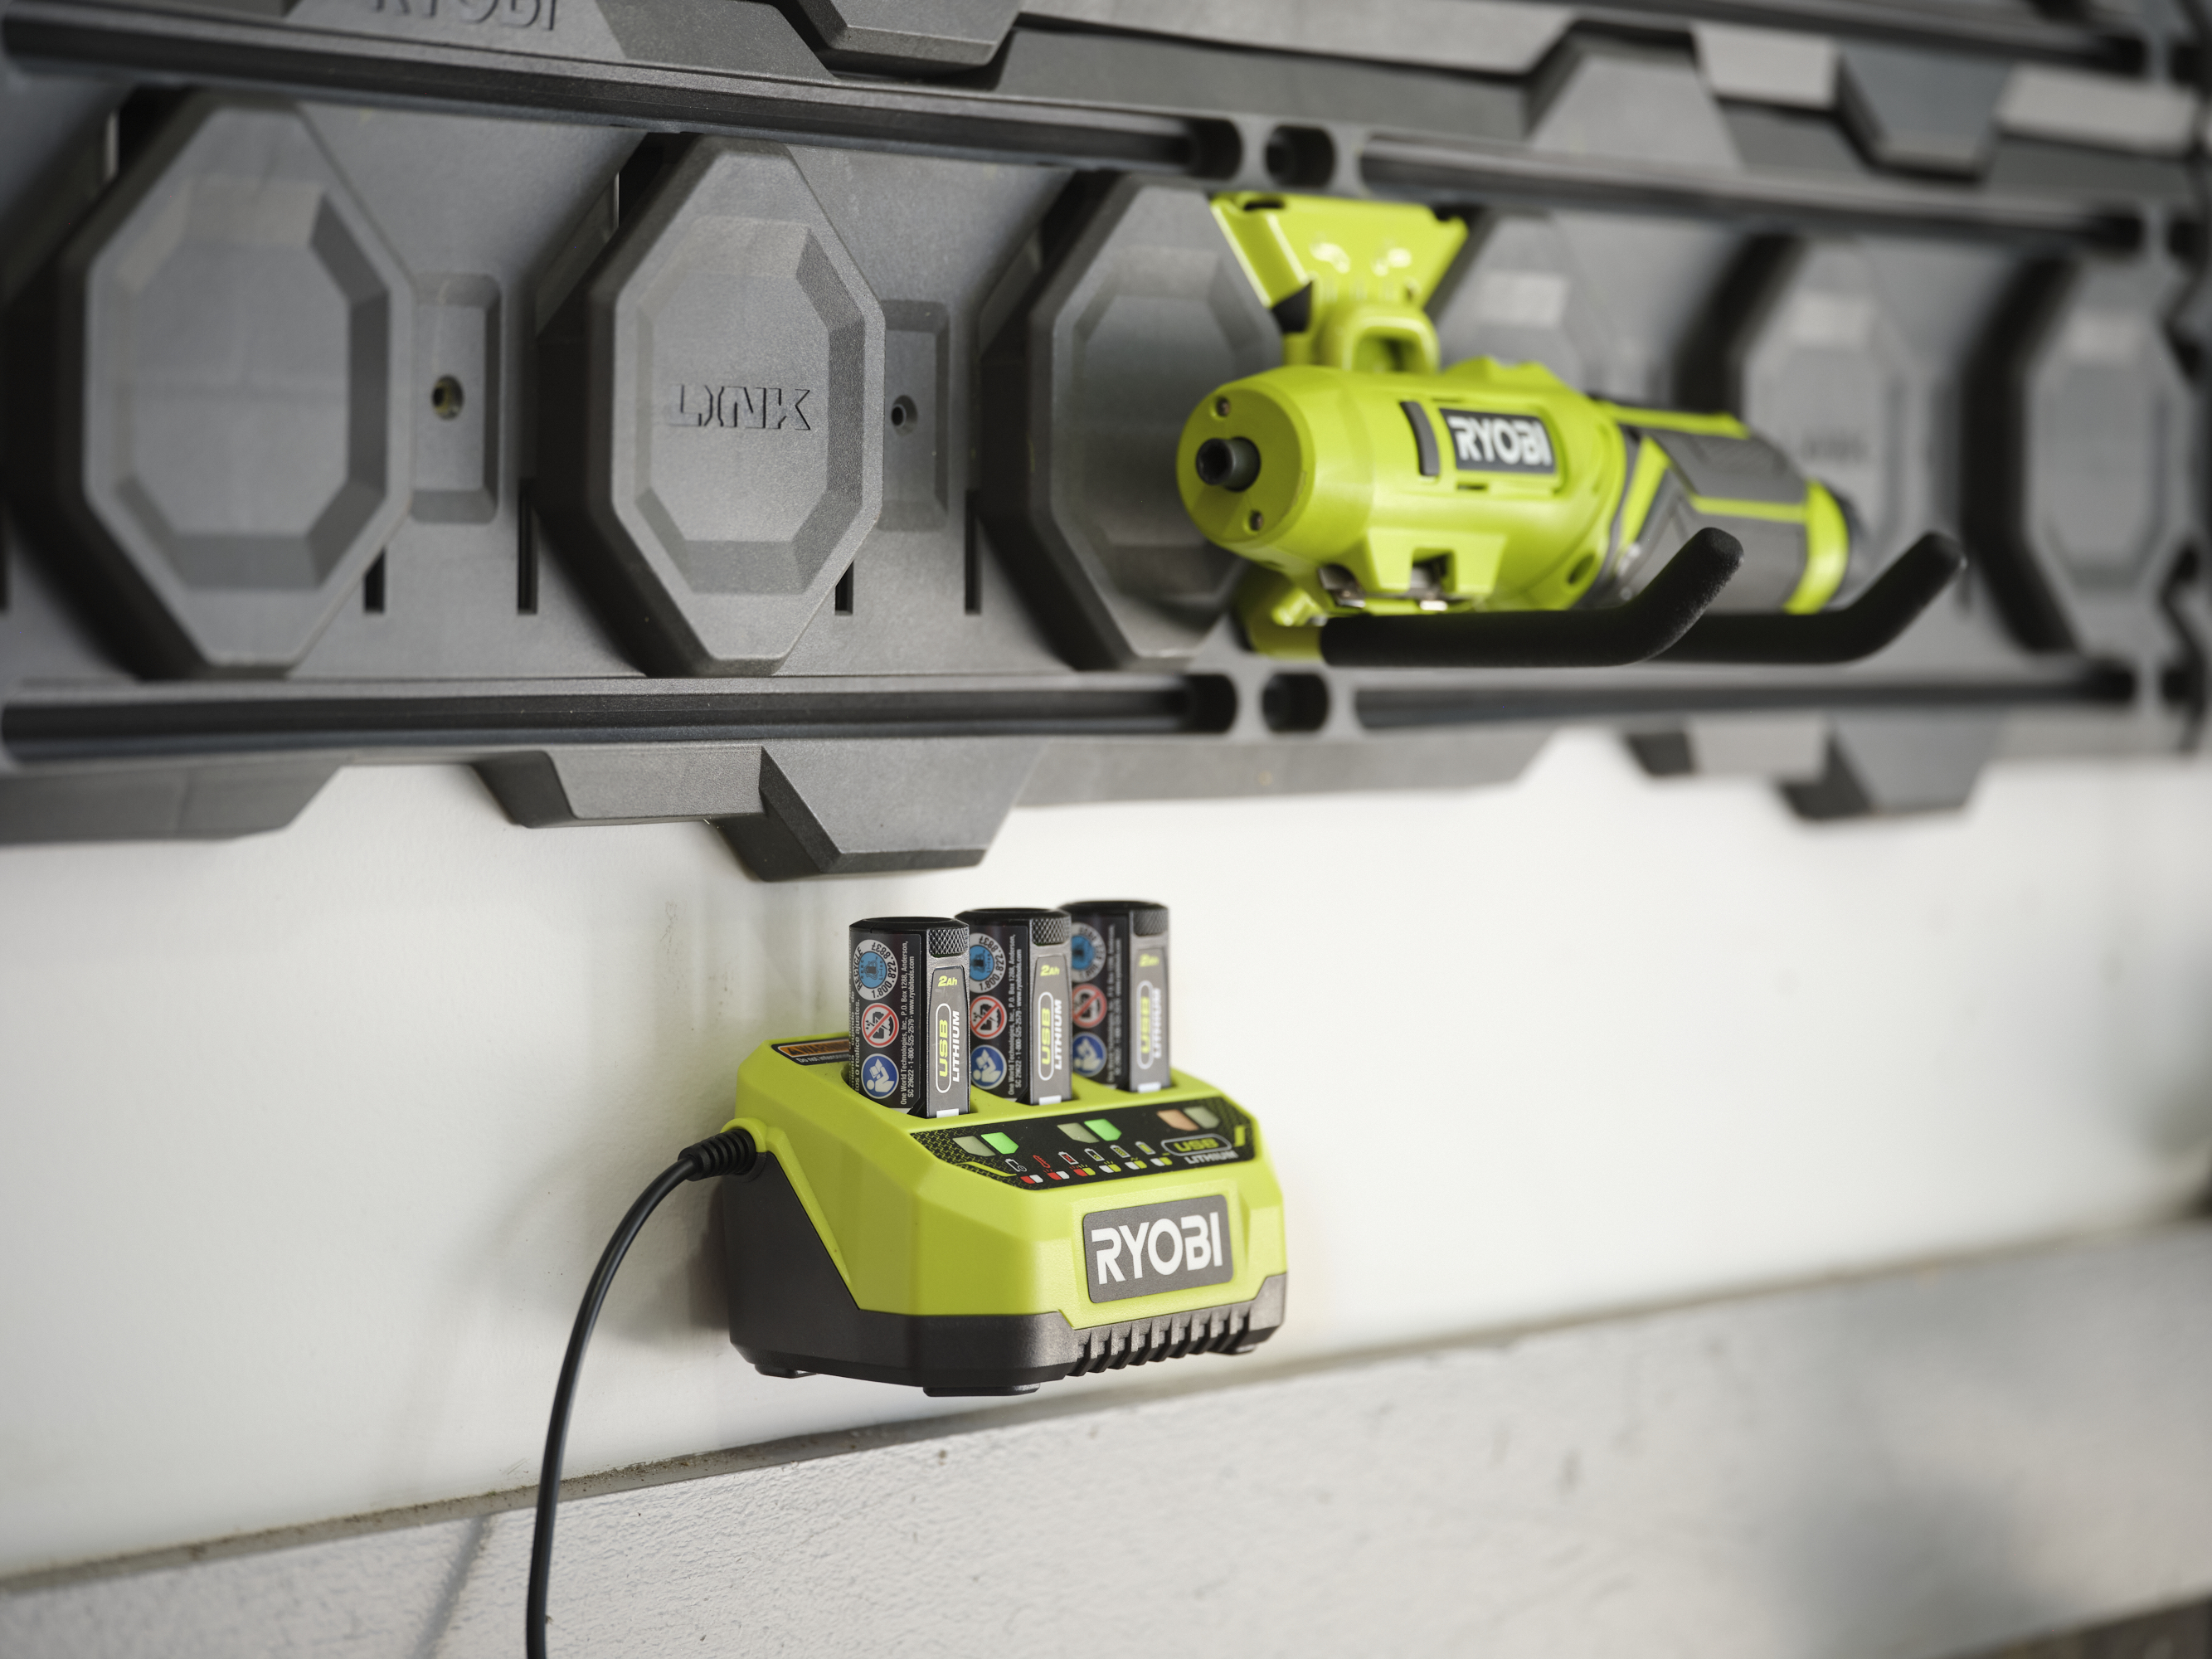 USB LITHIUM 2AH LITHIUM RECHARGEABLE BATTERY - RYOBI Tools